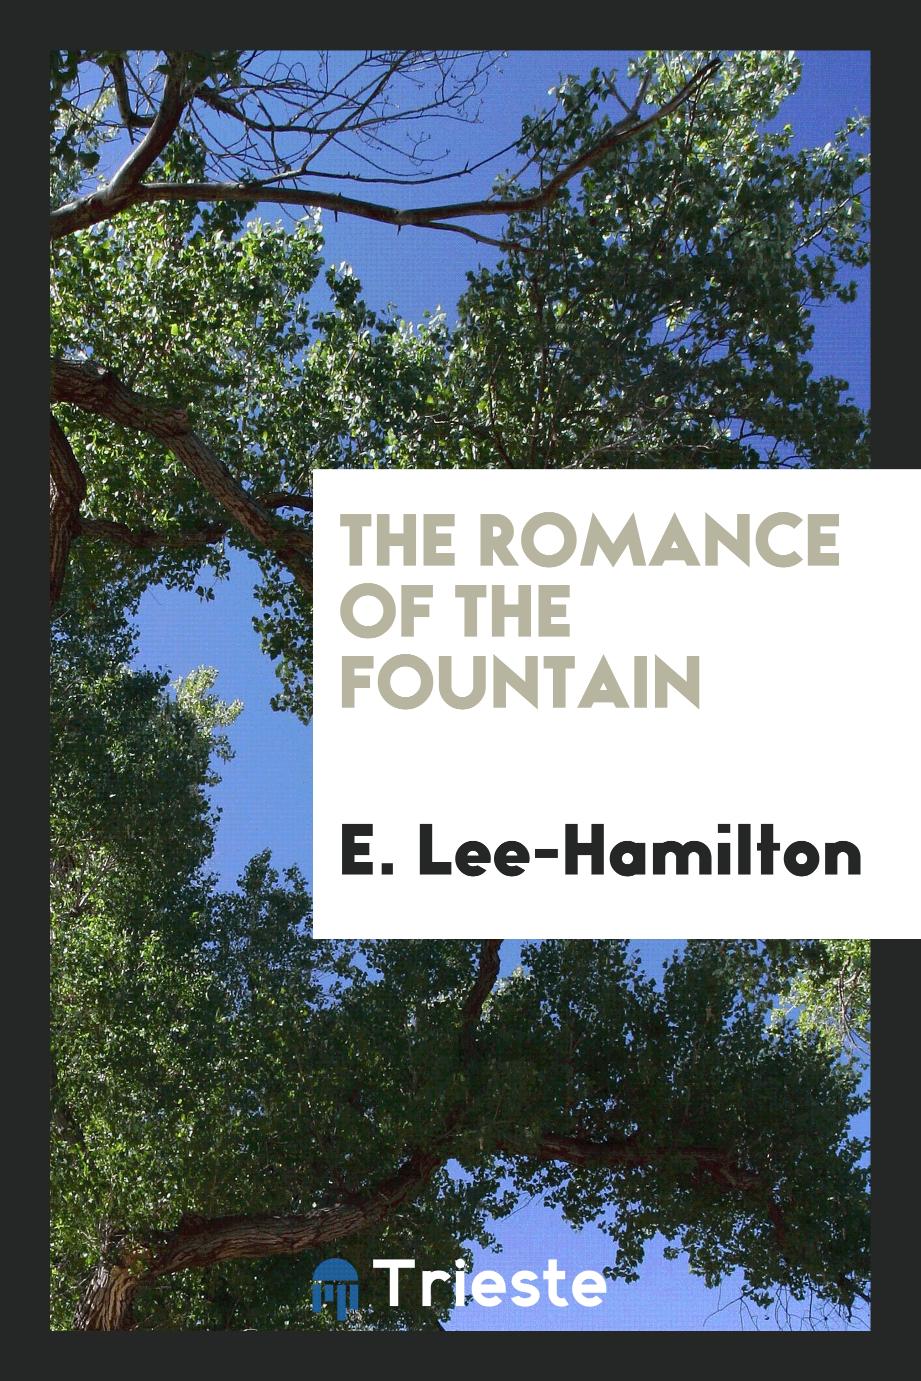 The romance of the fountain